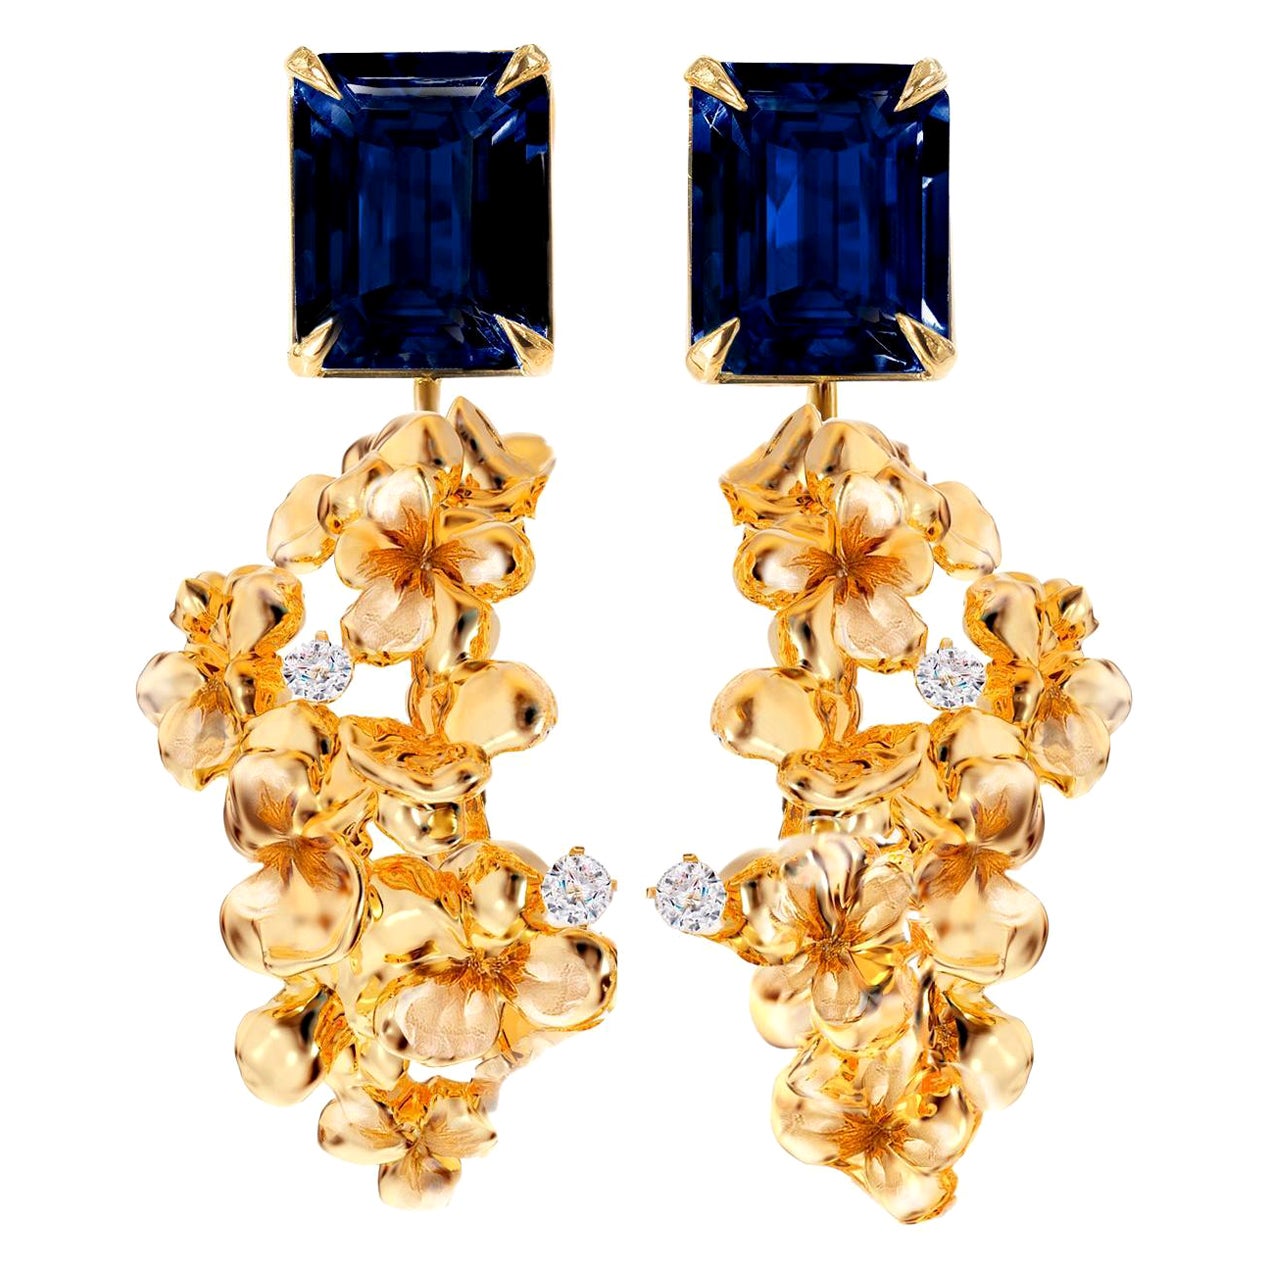 18 Karat Yellow Gold Clip-on Earrings with Diamonds and Sapphires